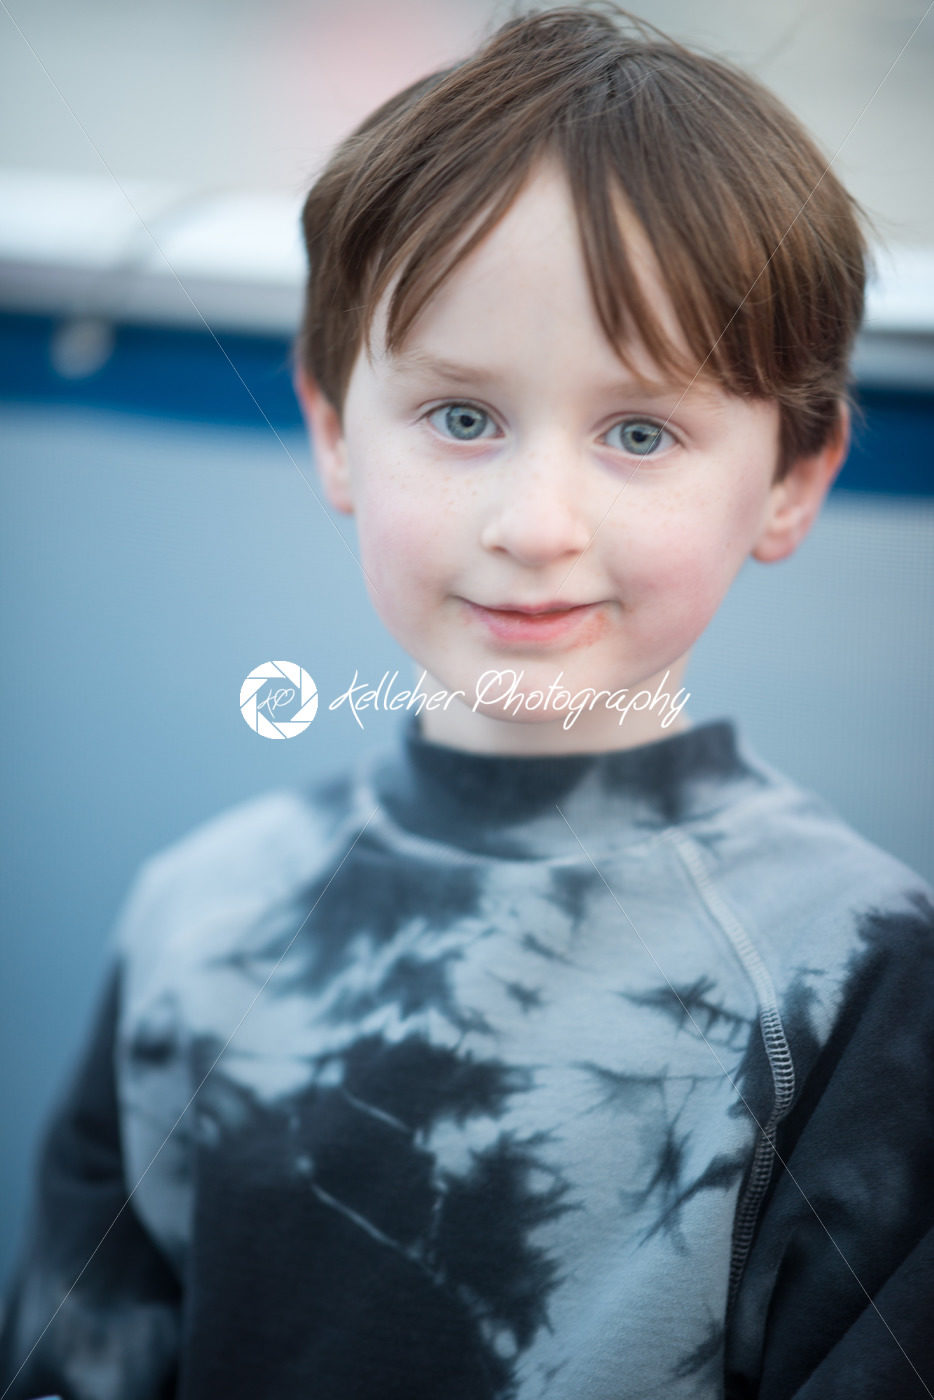 Young boy outside on boat looking happy - Kelleher Photography Store